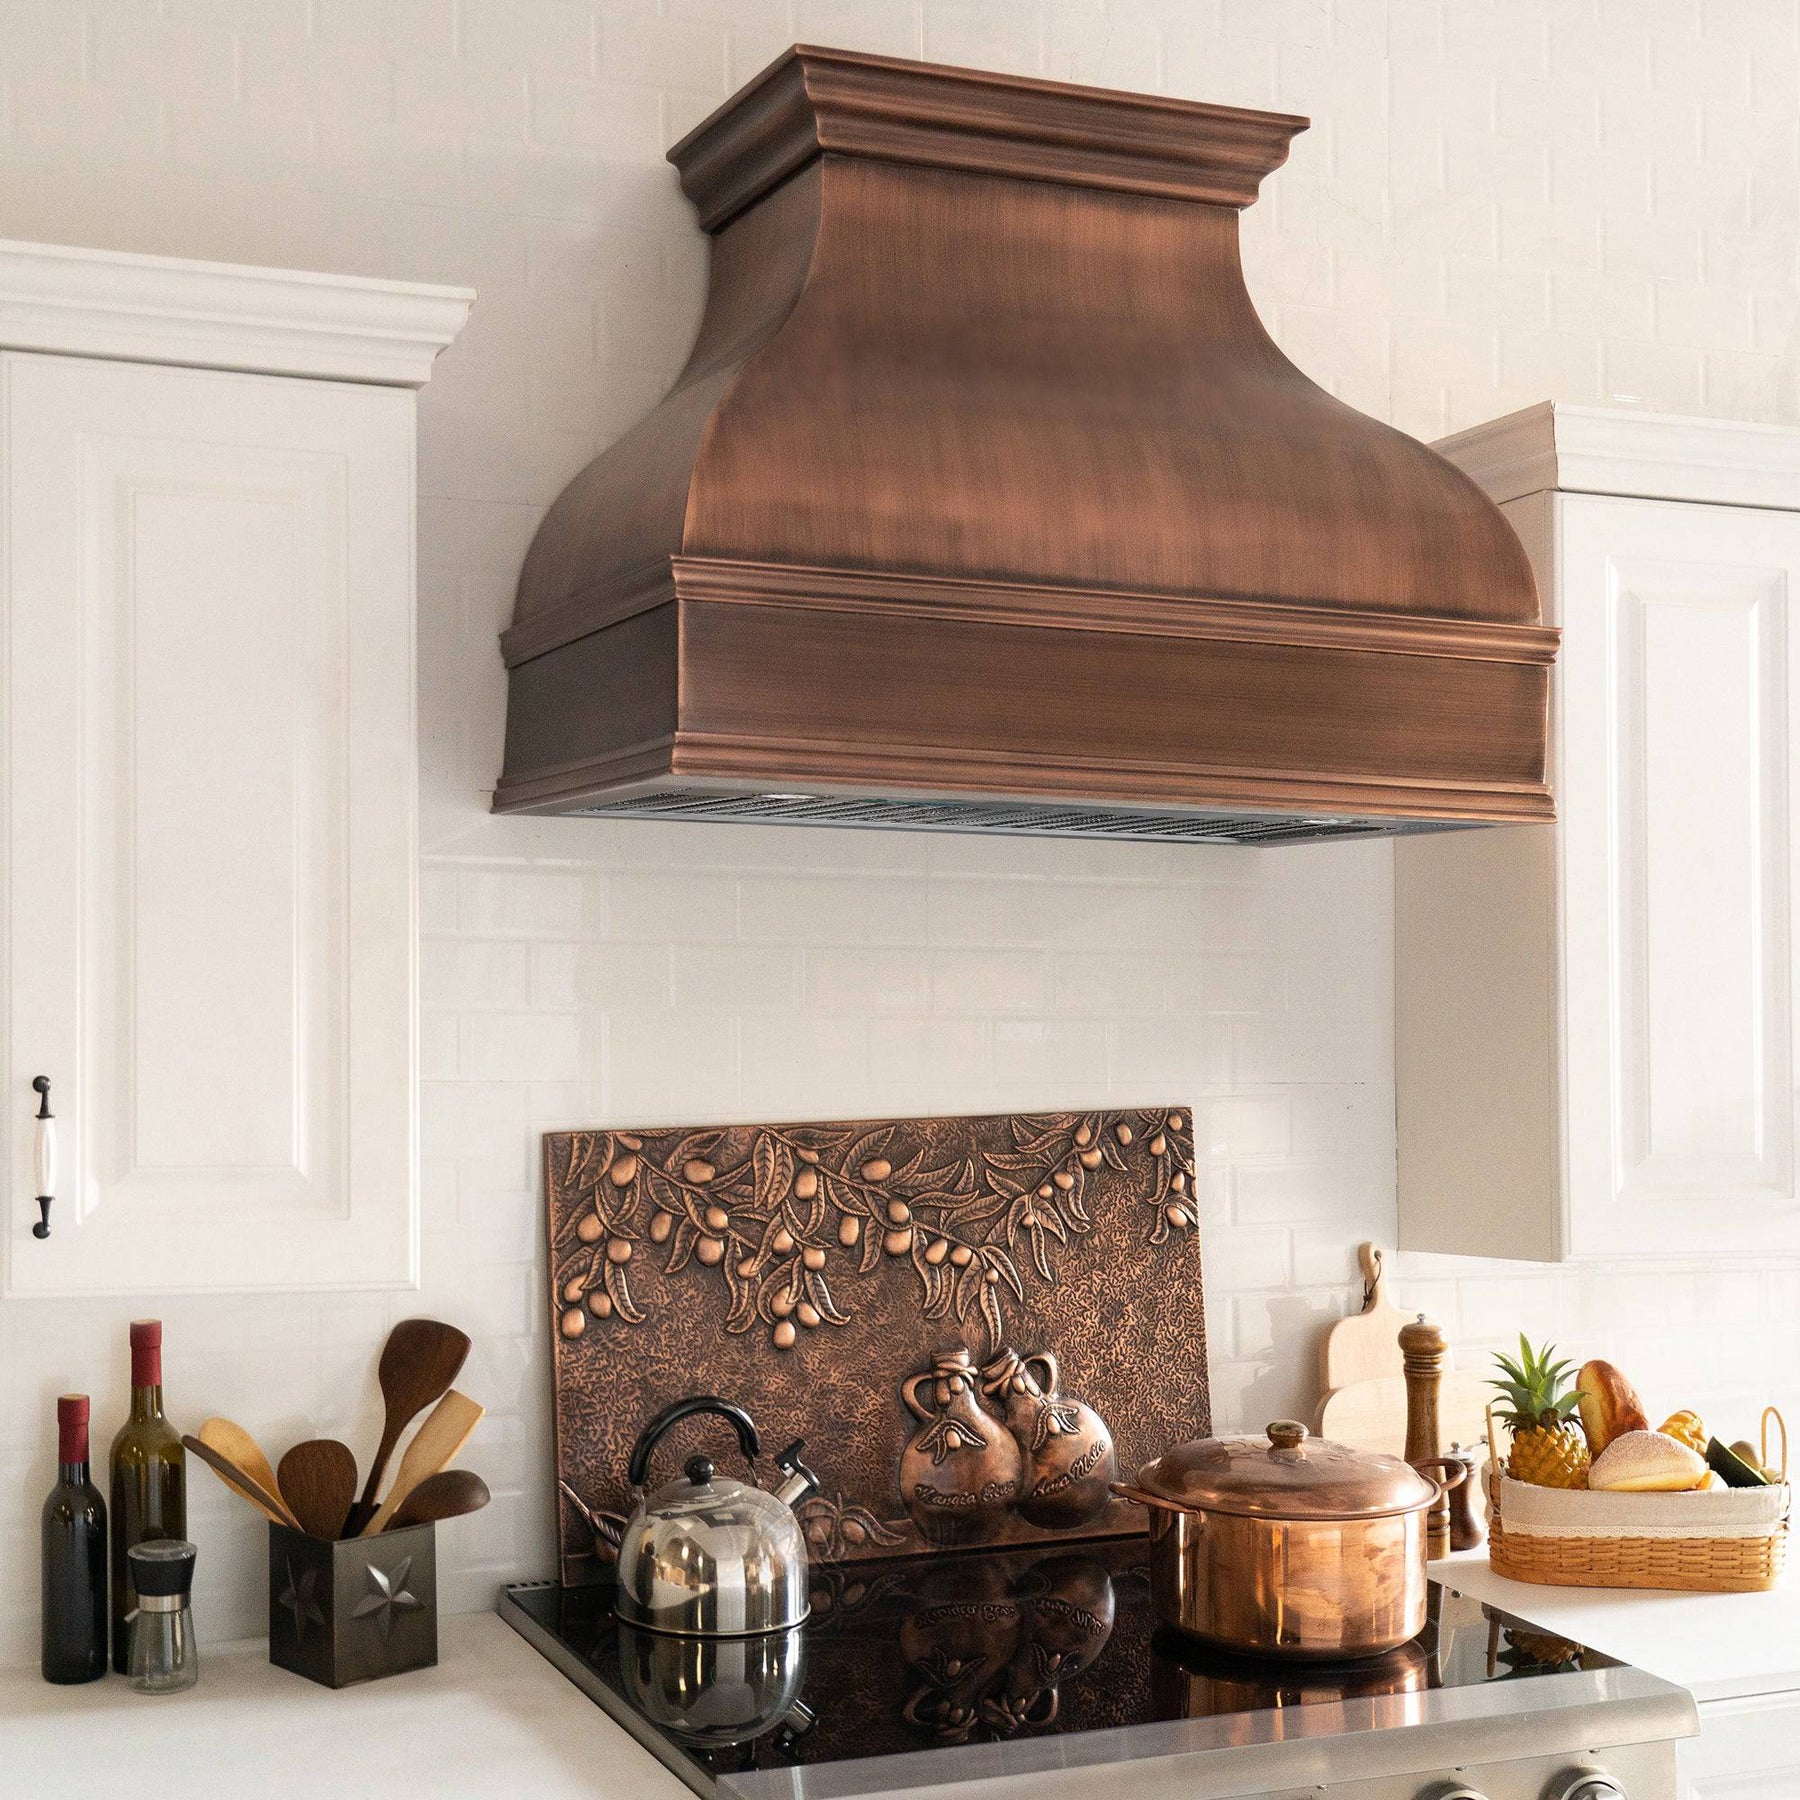 Fobest Rustic Handmade Custom Copper Range Hood with Smooth and Hammer Finish FCP-22 - Copper Range Hood-Fobest Appliance